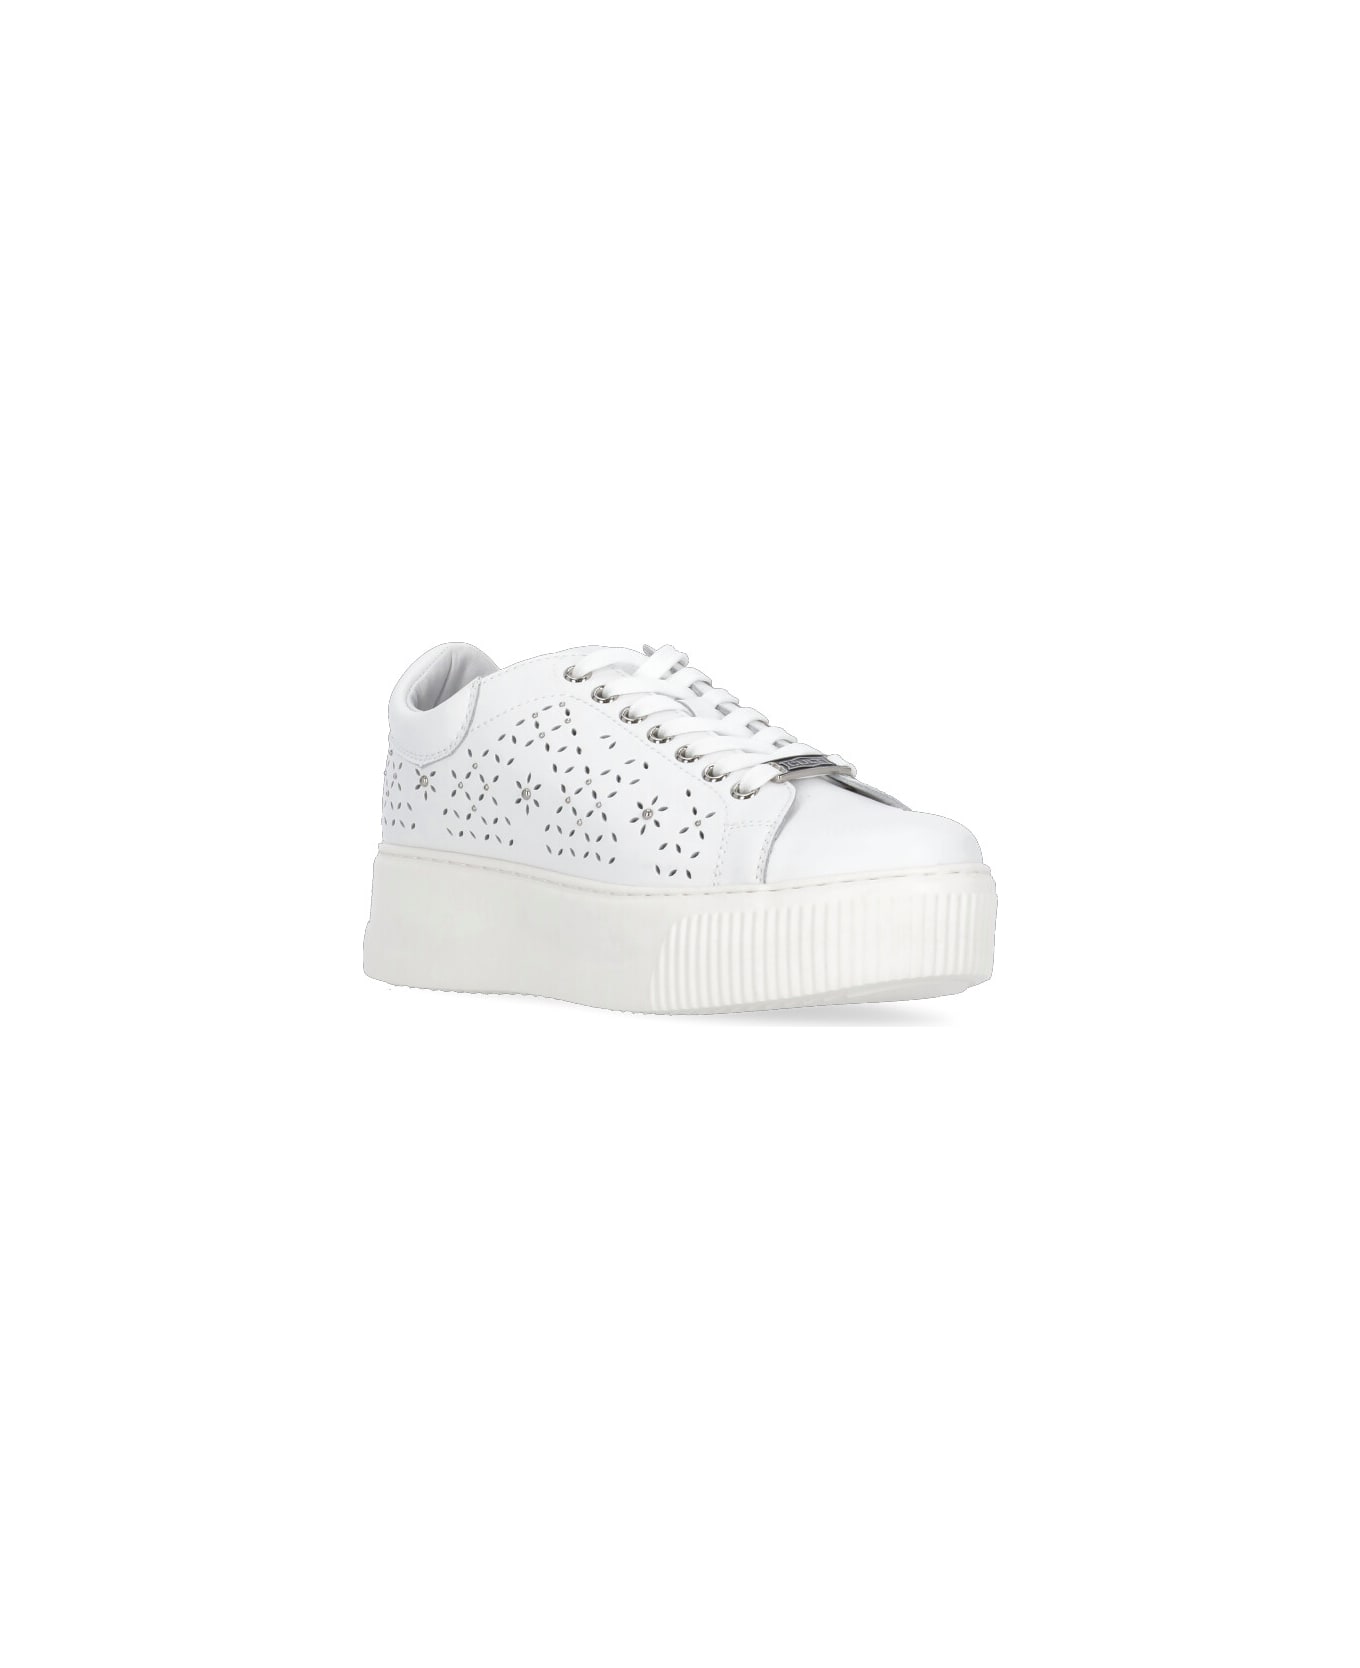 Cult Perry 3371 Sneakers - White ウェッジシューズ